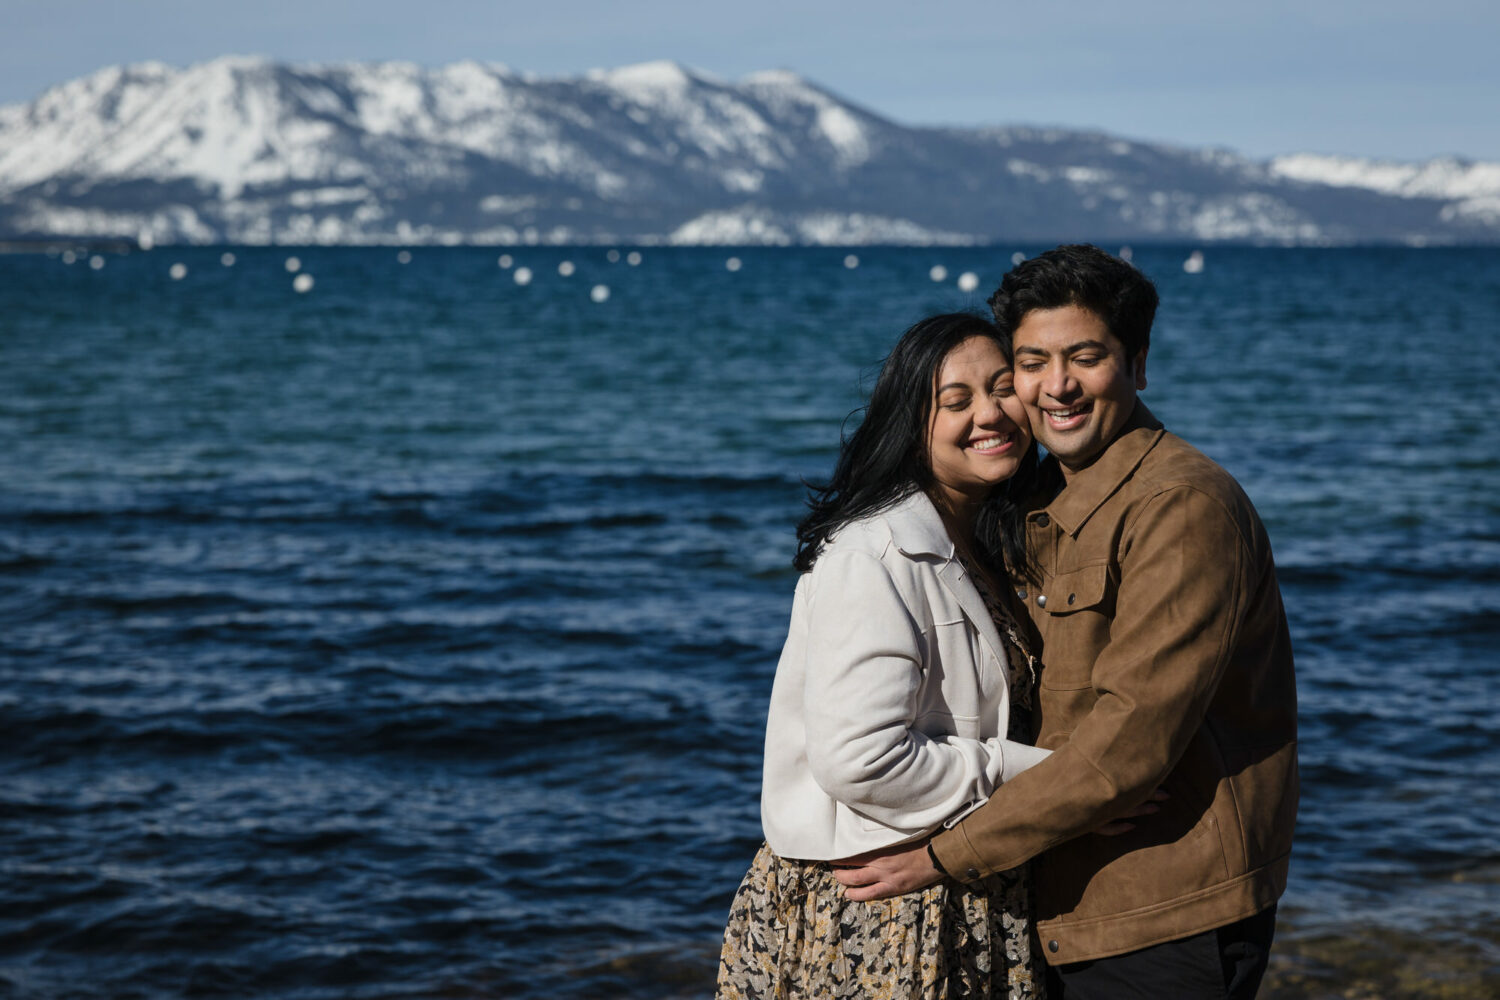 Surprise proposal in front of Lake Tahoe with the mountain range visible in the background.